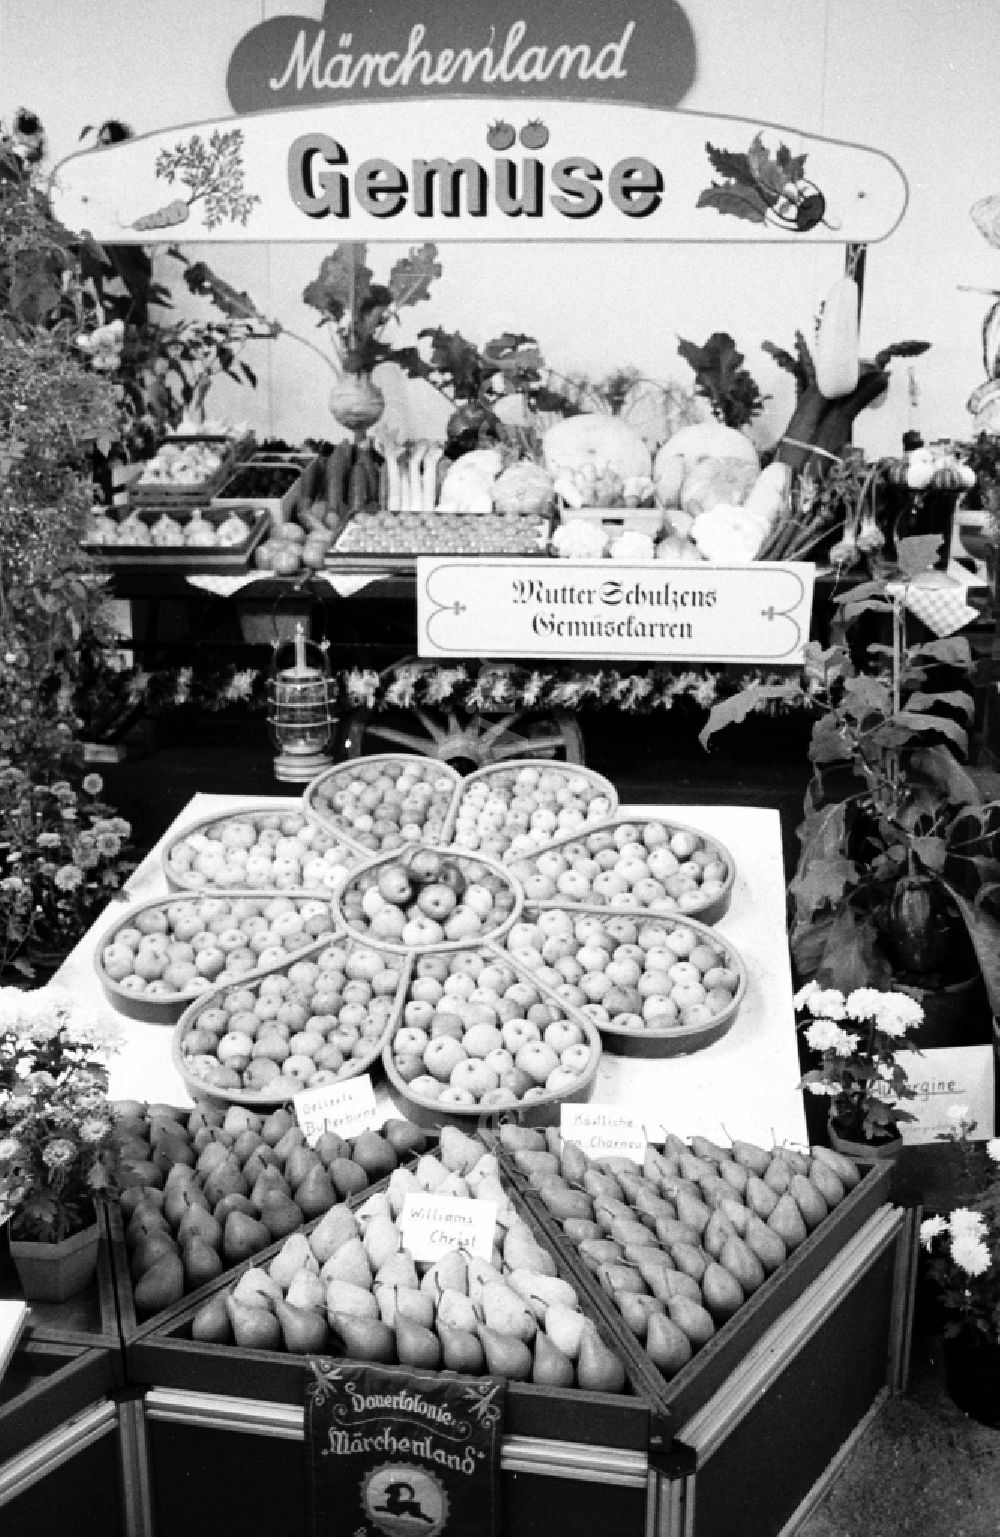 GDR image archive: Berlin - Merchandise on the allotment gardens Maerchenland from 11 to 2